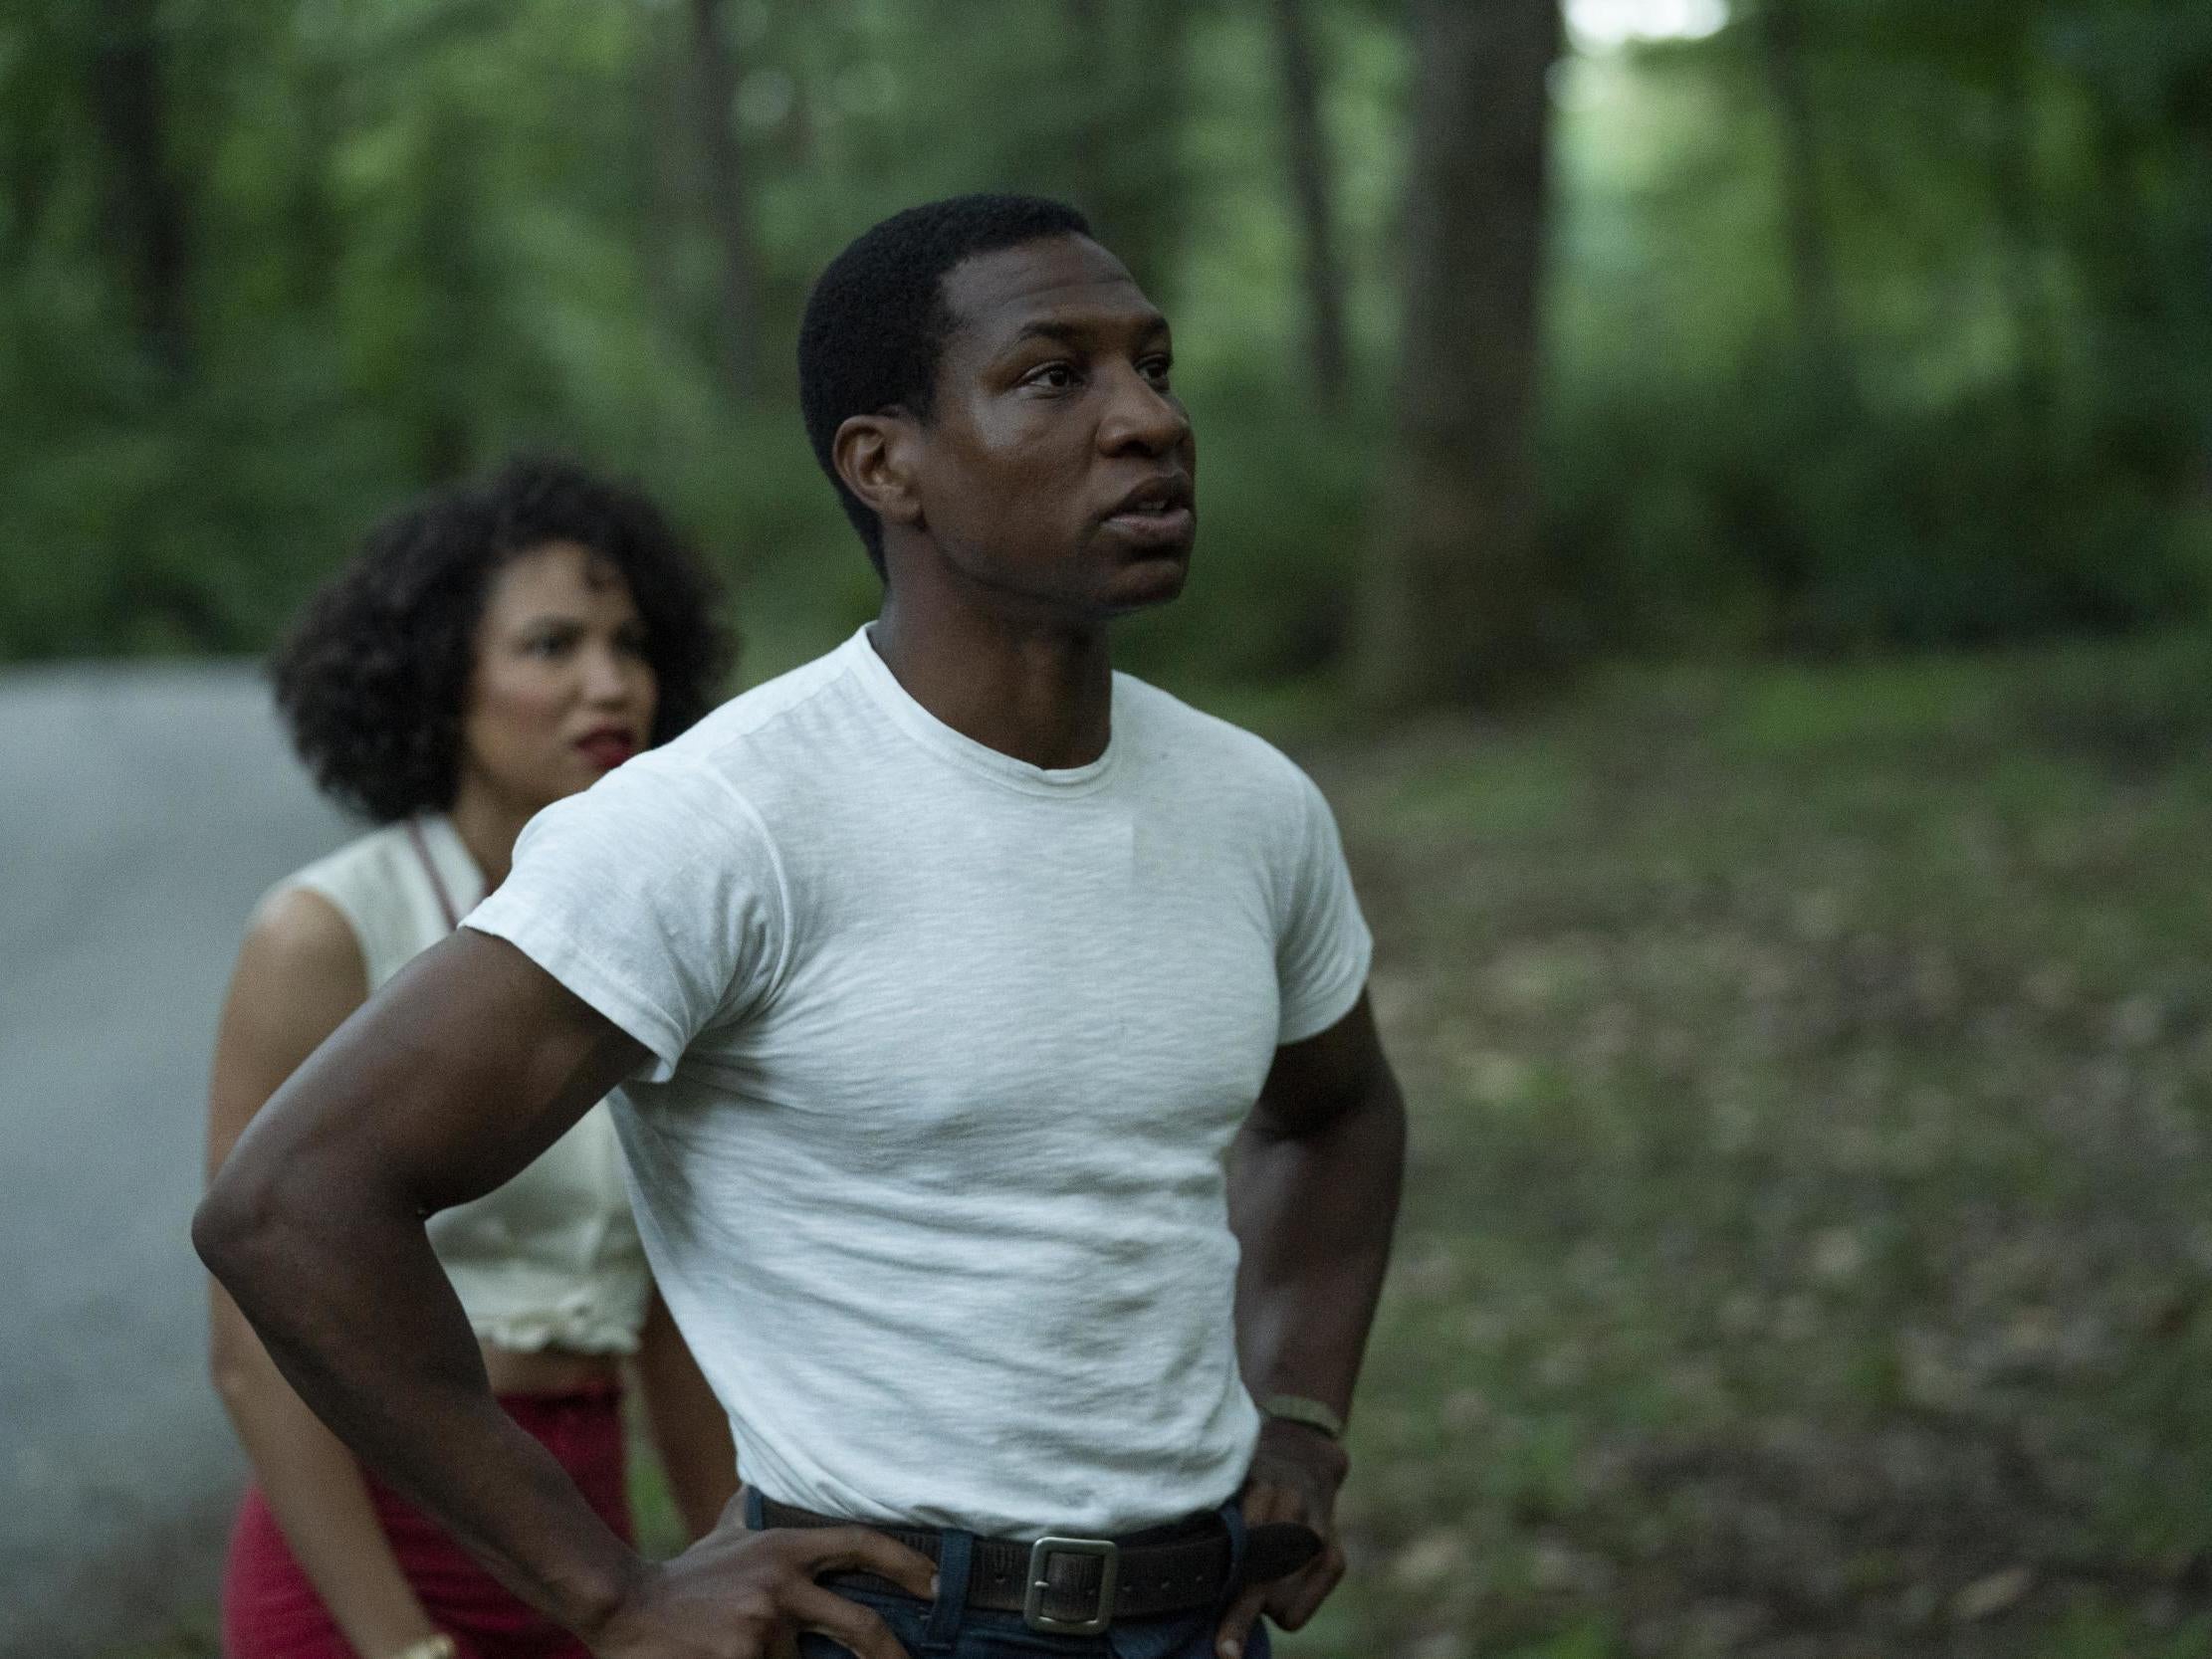 Racial horror ‘Lovecraft Country’ stars Jonathan Majors as Atticus Black, a man who goes searching for his missing father